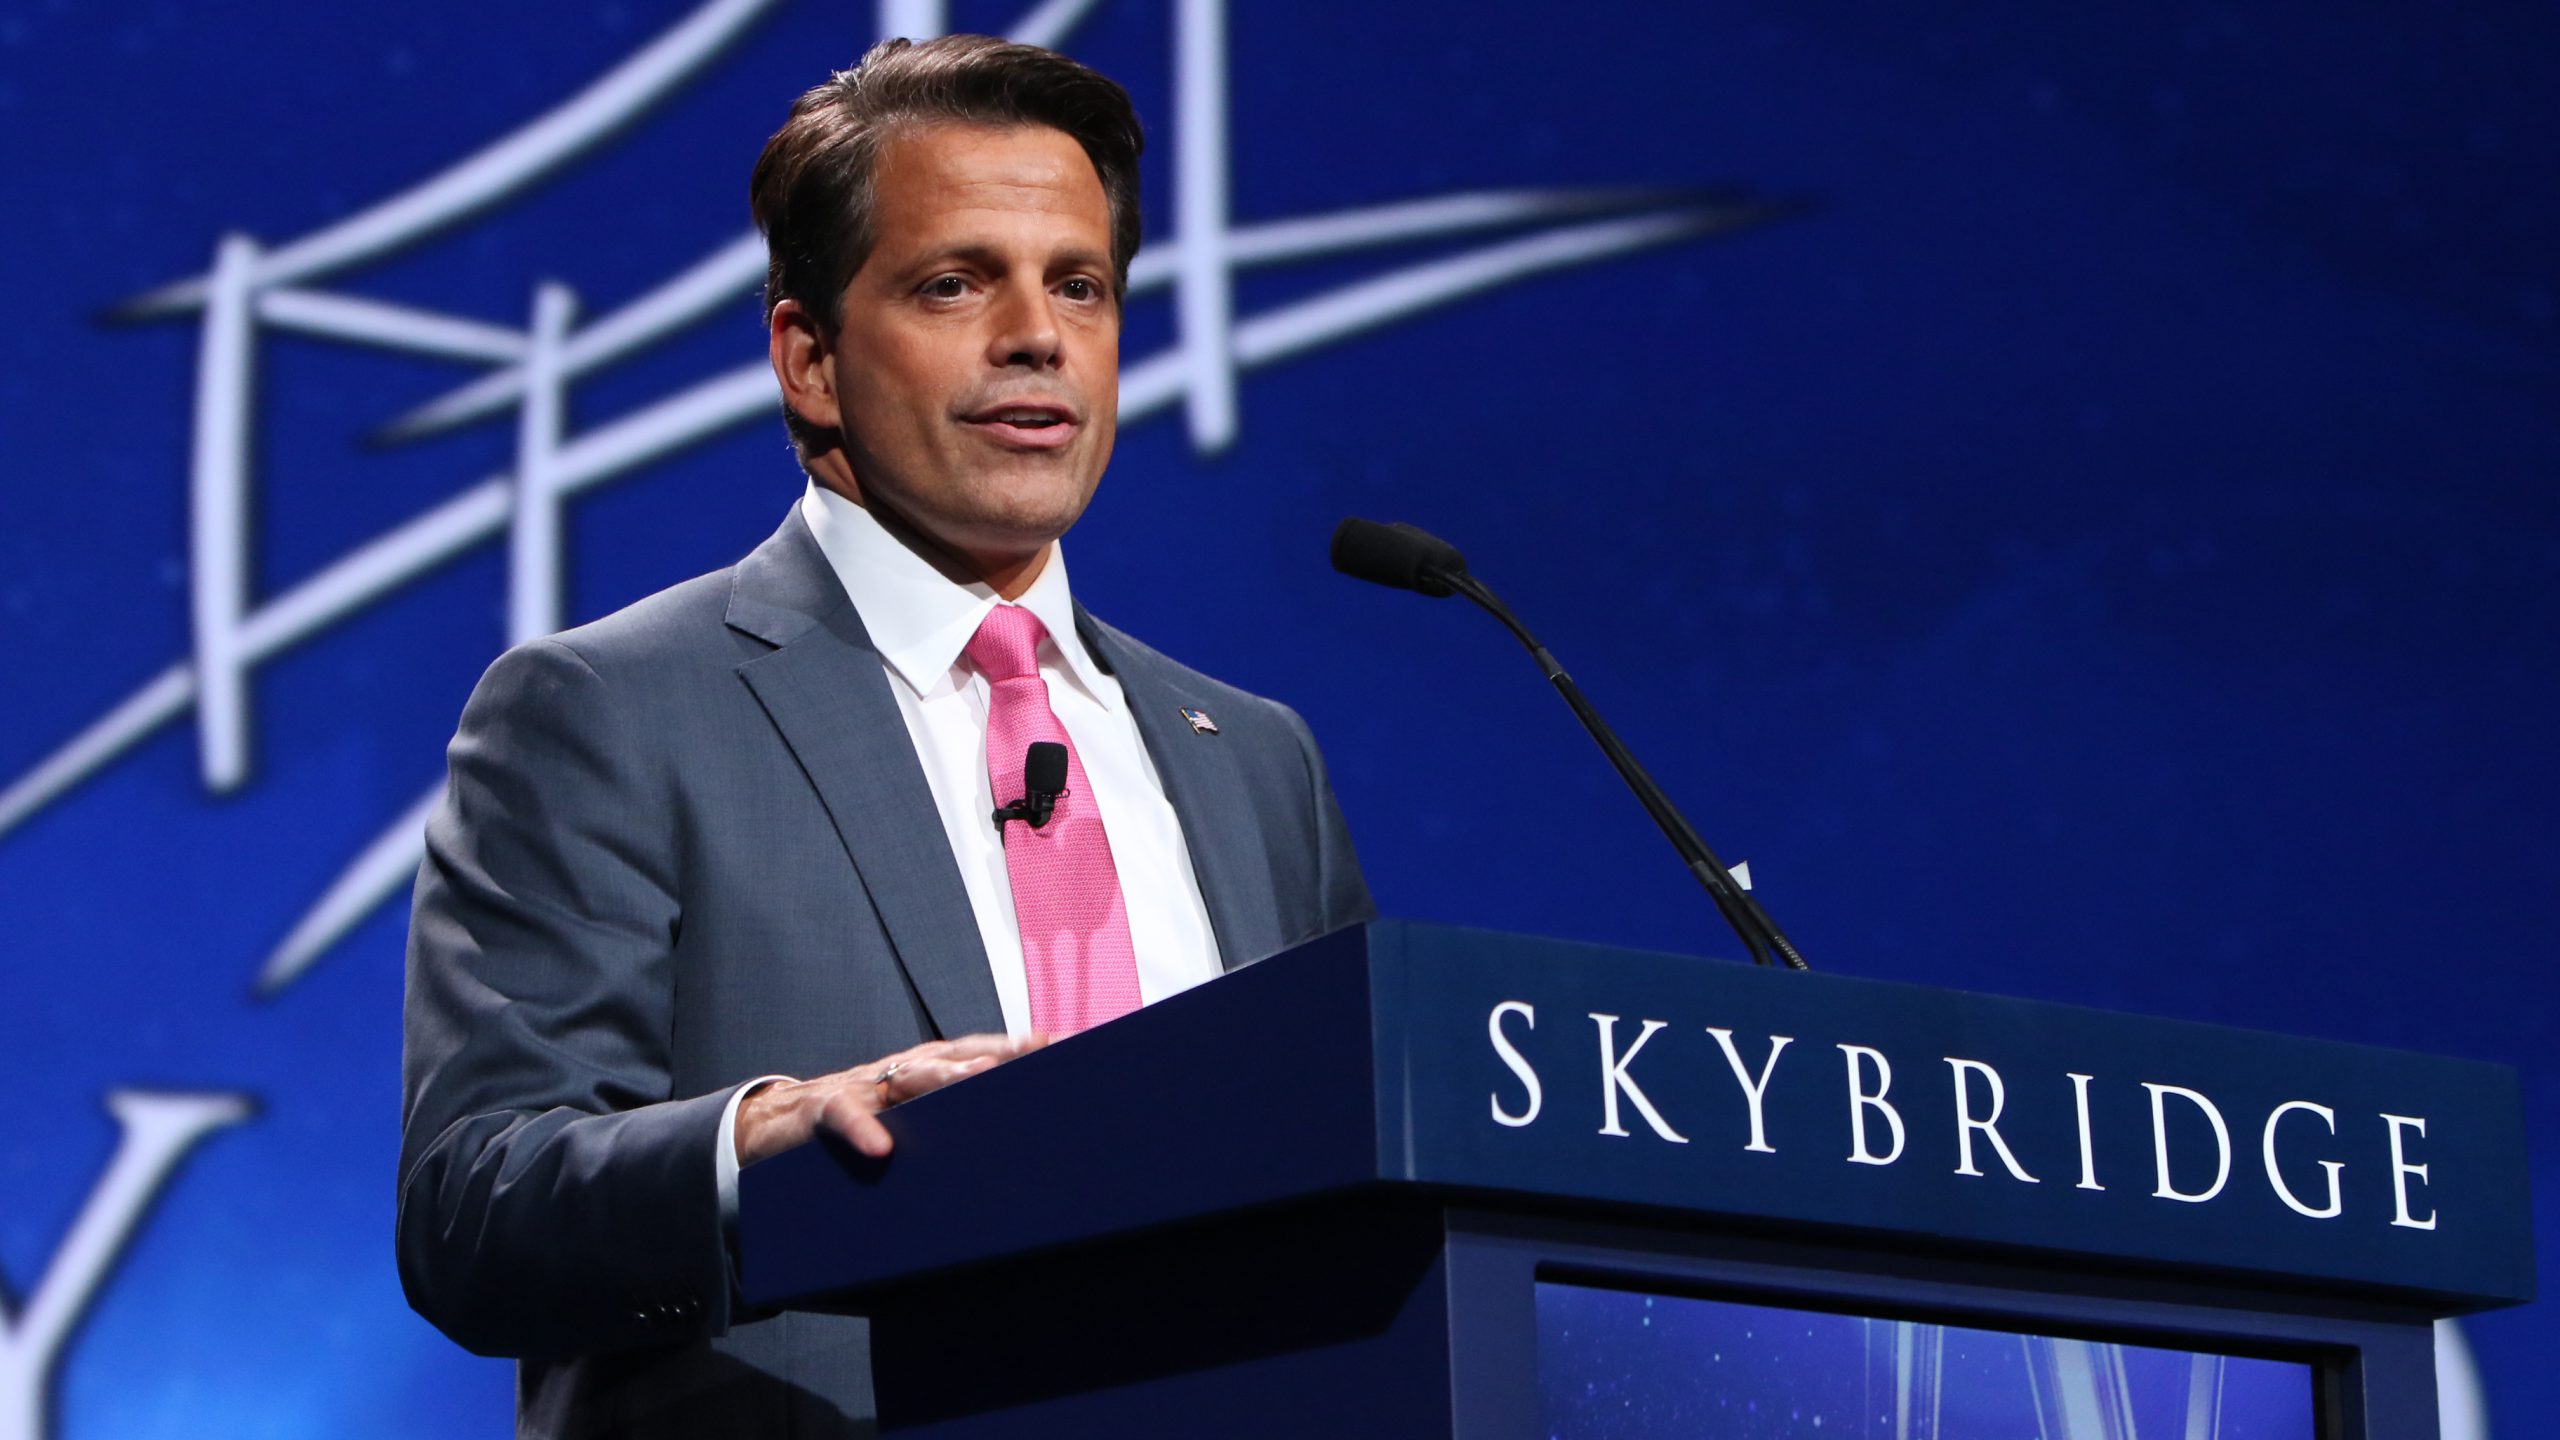 Promi Big Brother 2019 USA Anthony Scaramucci